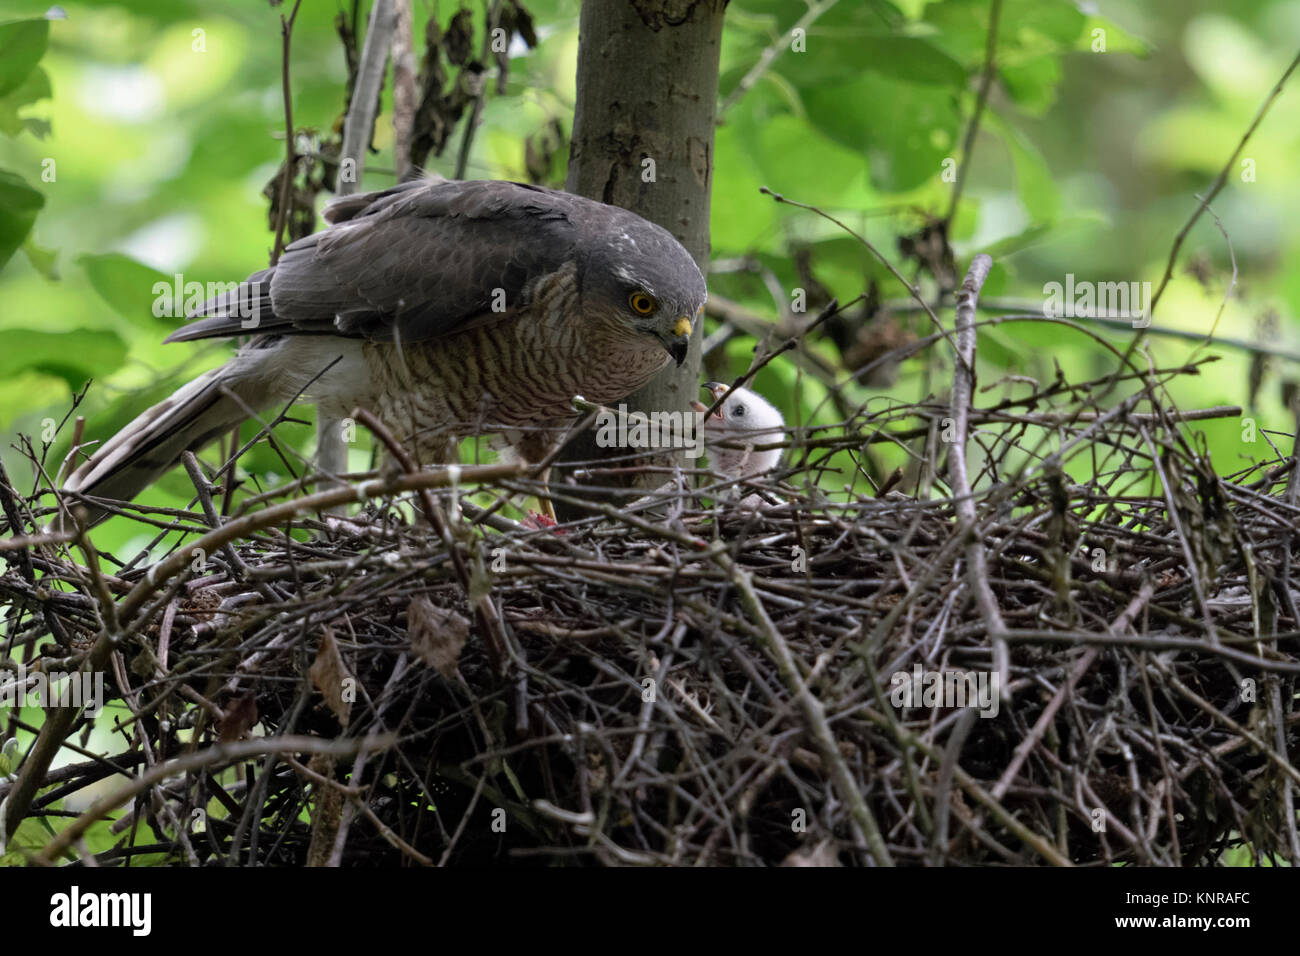 Sparrowhawk / Sperber ( Accipiter nisus ), adult female standing on the edge of its nest, feeding its chick, young nestling begging for food, wildlife Stock Photo